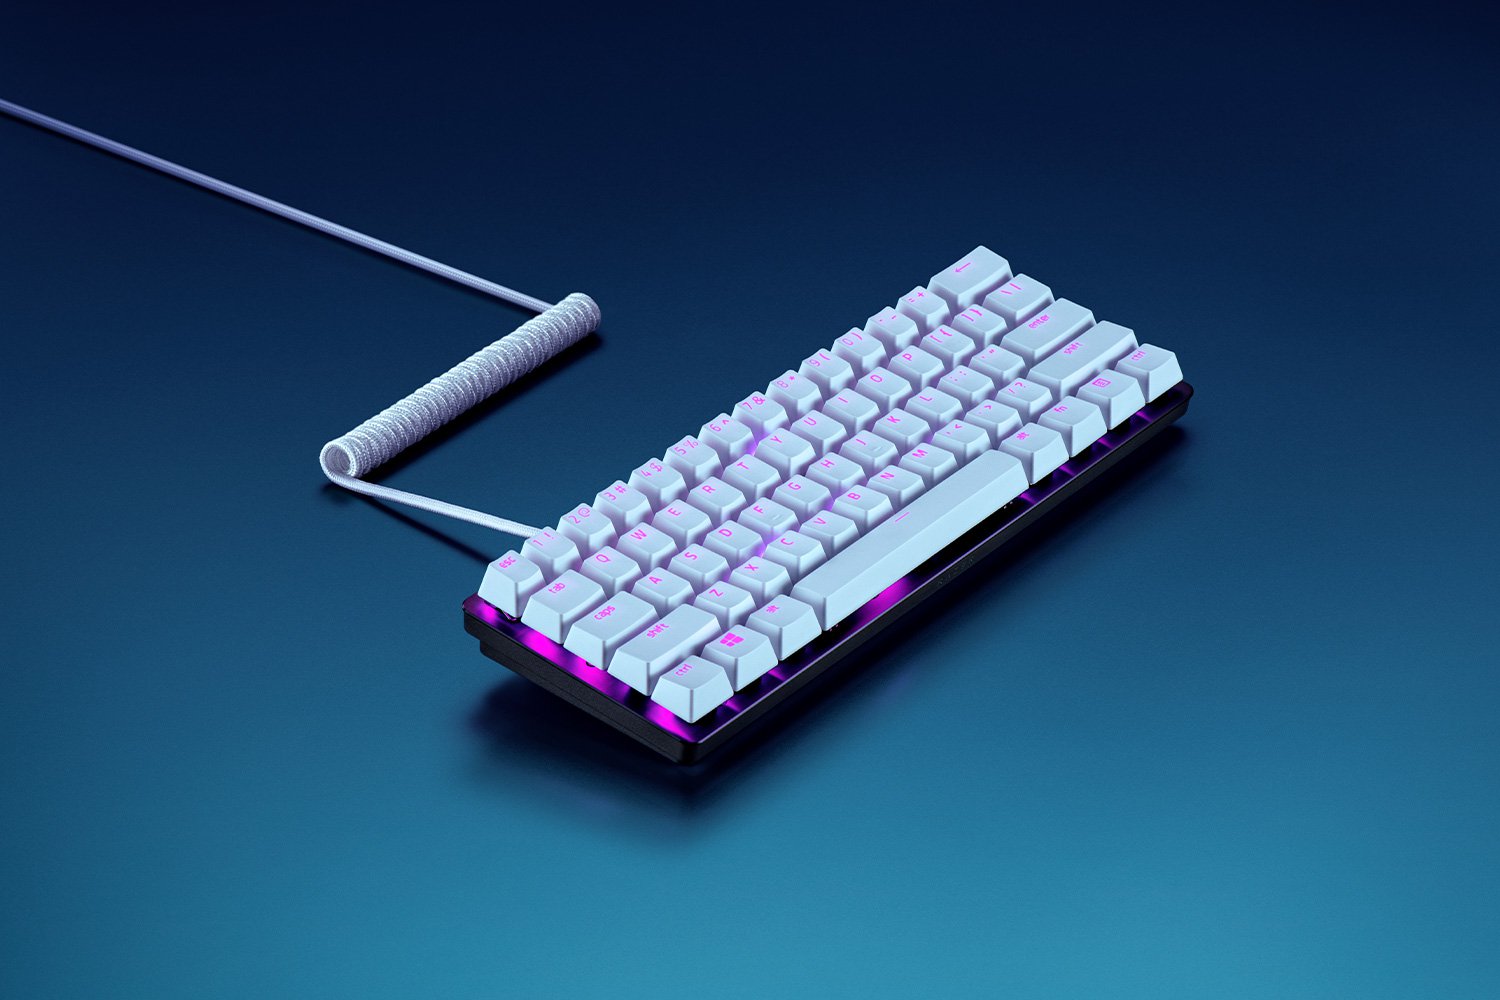 Buy Razer PBT Keycap + Coiled Cable Upgrade Set - Mercury White, Gaming  Keyboards Accessories